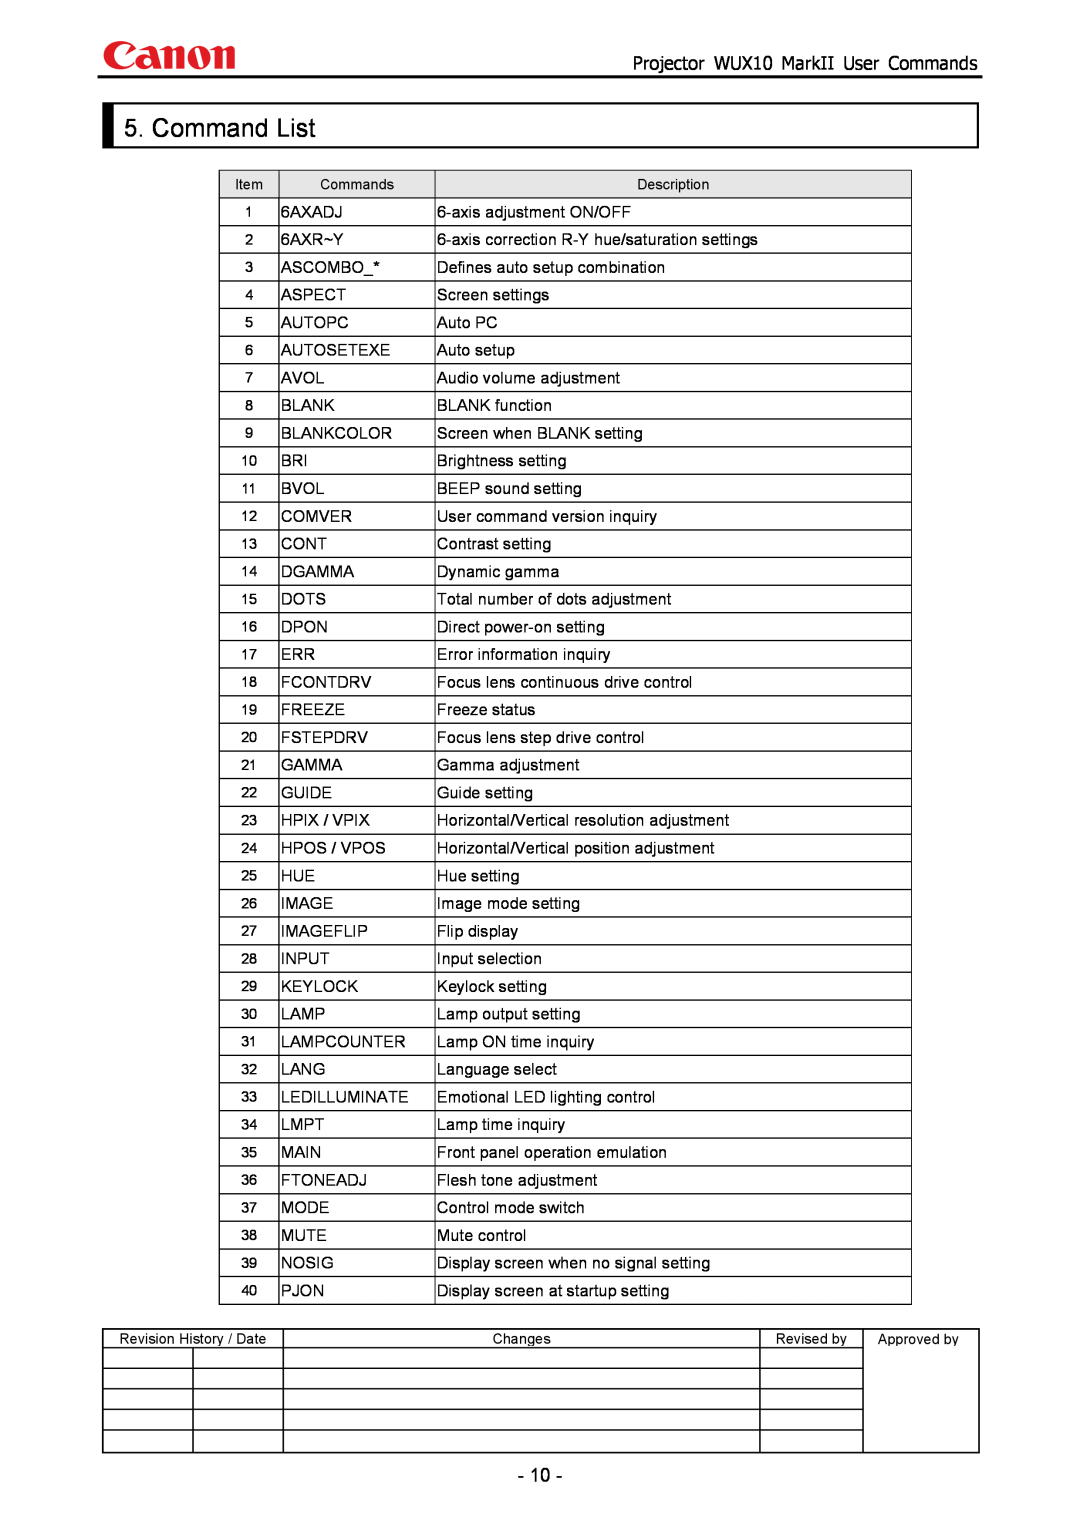 Canon manual Command List, Projector WUX10 MarkII User Commands 